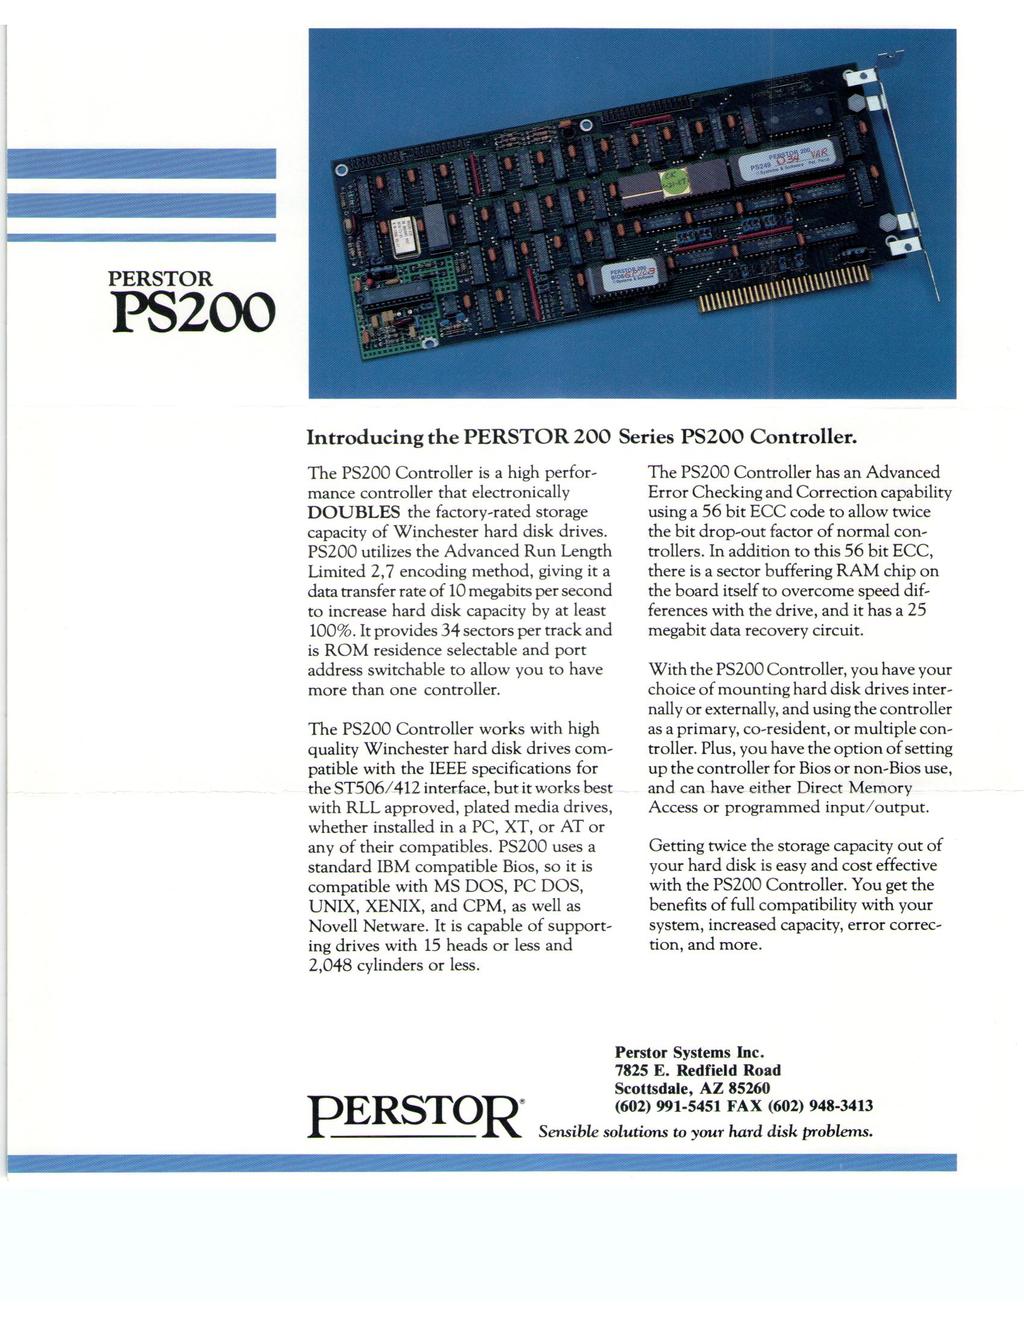 - PERSTOR PS200 WikkkkkItt110110010\ Introducing the PERSTOR 200 The PS200 Controller is a high performance controller that electronically DOUBLES the factory-rated storage capacity of Winchester